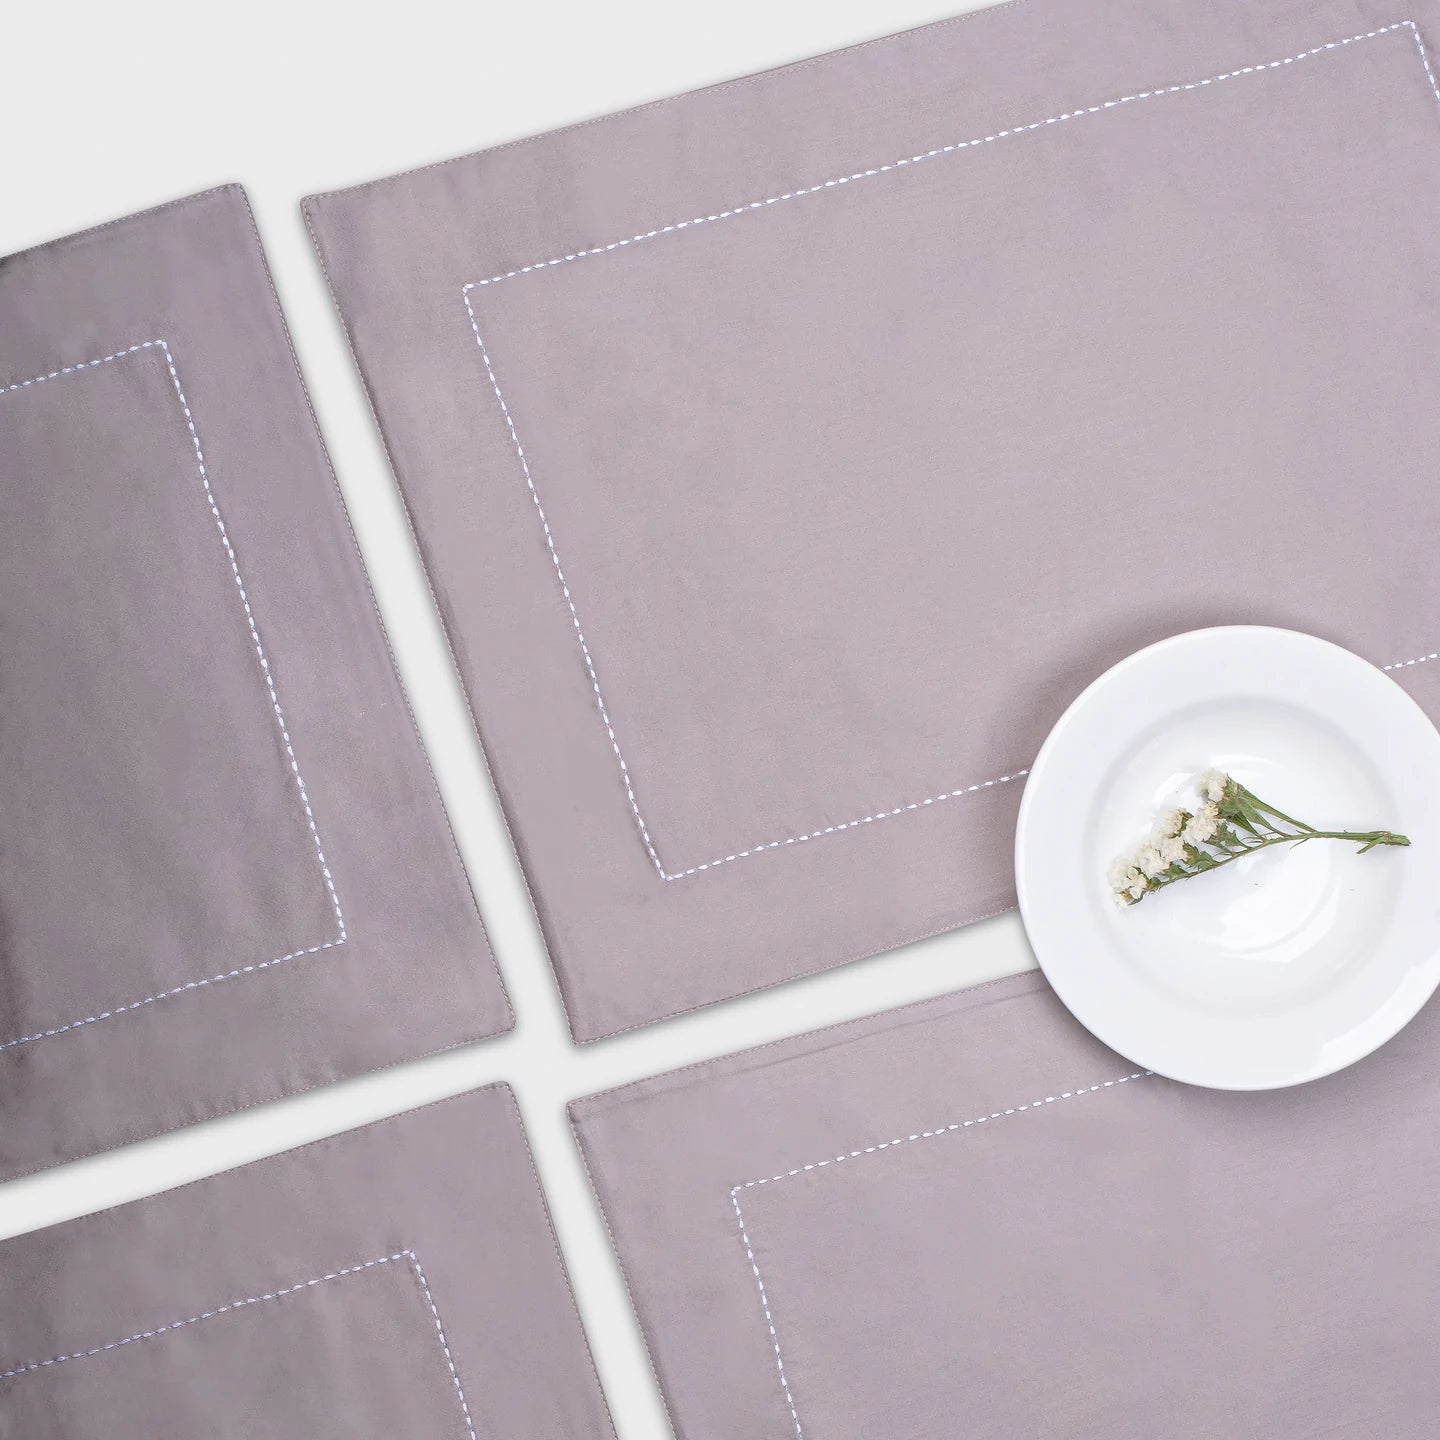 Rice Modern Grey Placemats (Set of 4) by Veda Homes - Home Artisan